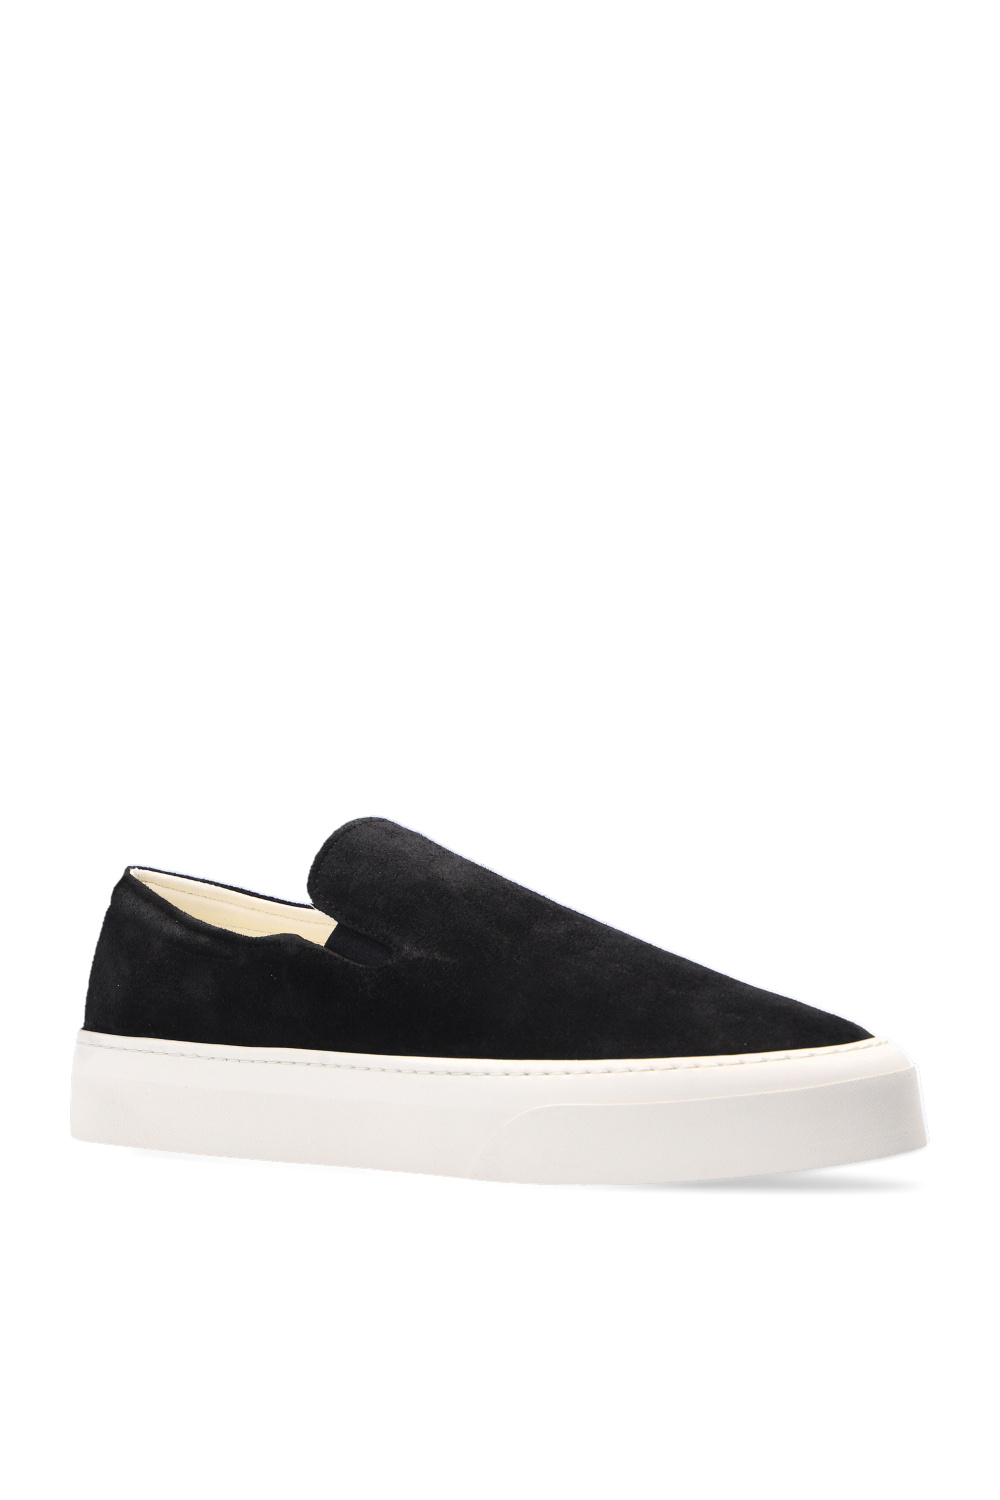 The Row 'Marie H' sneakers | Women's Shoes | Vitkac